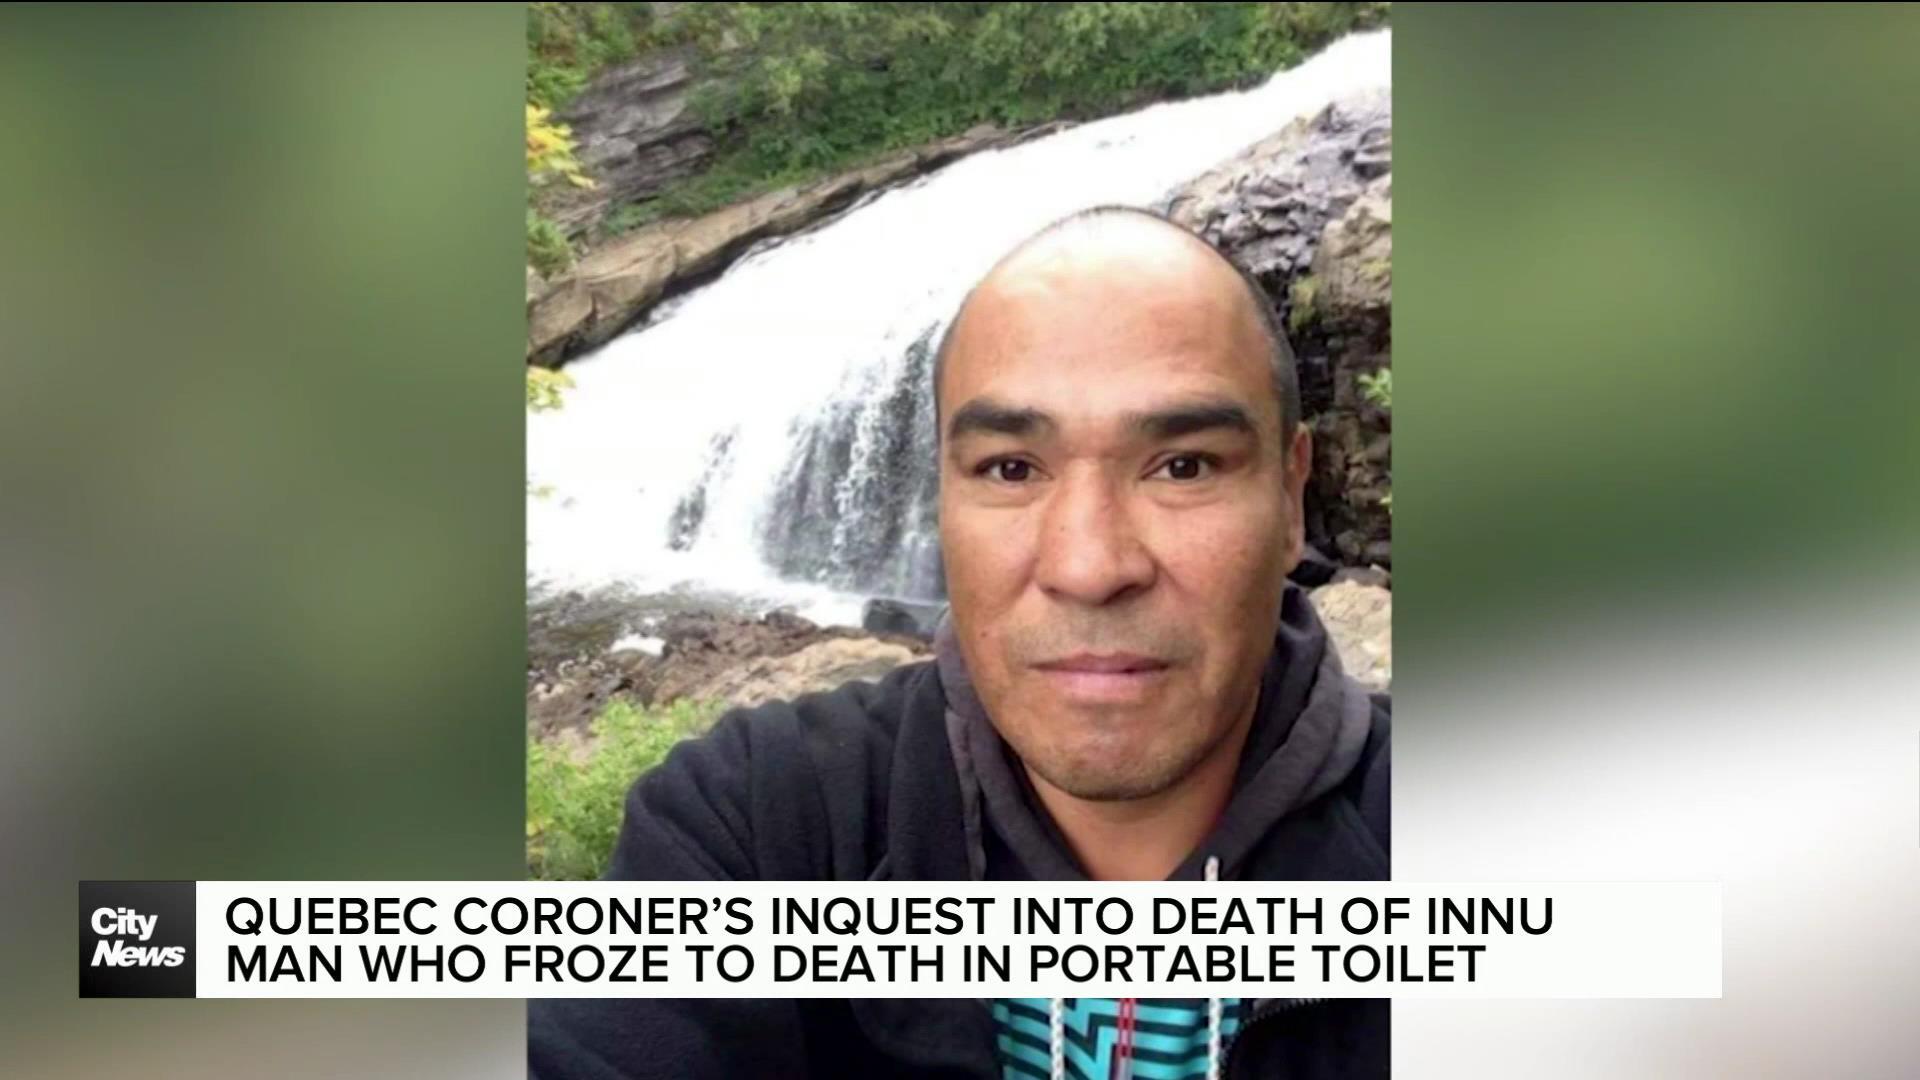 Quebec coroner’s inquest into death of Innu man who froze to death